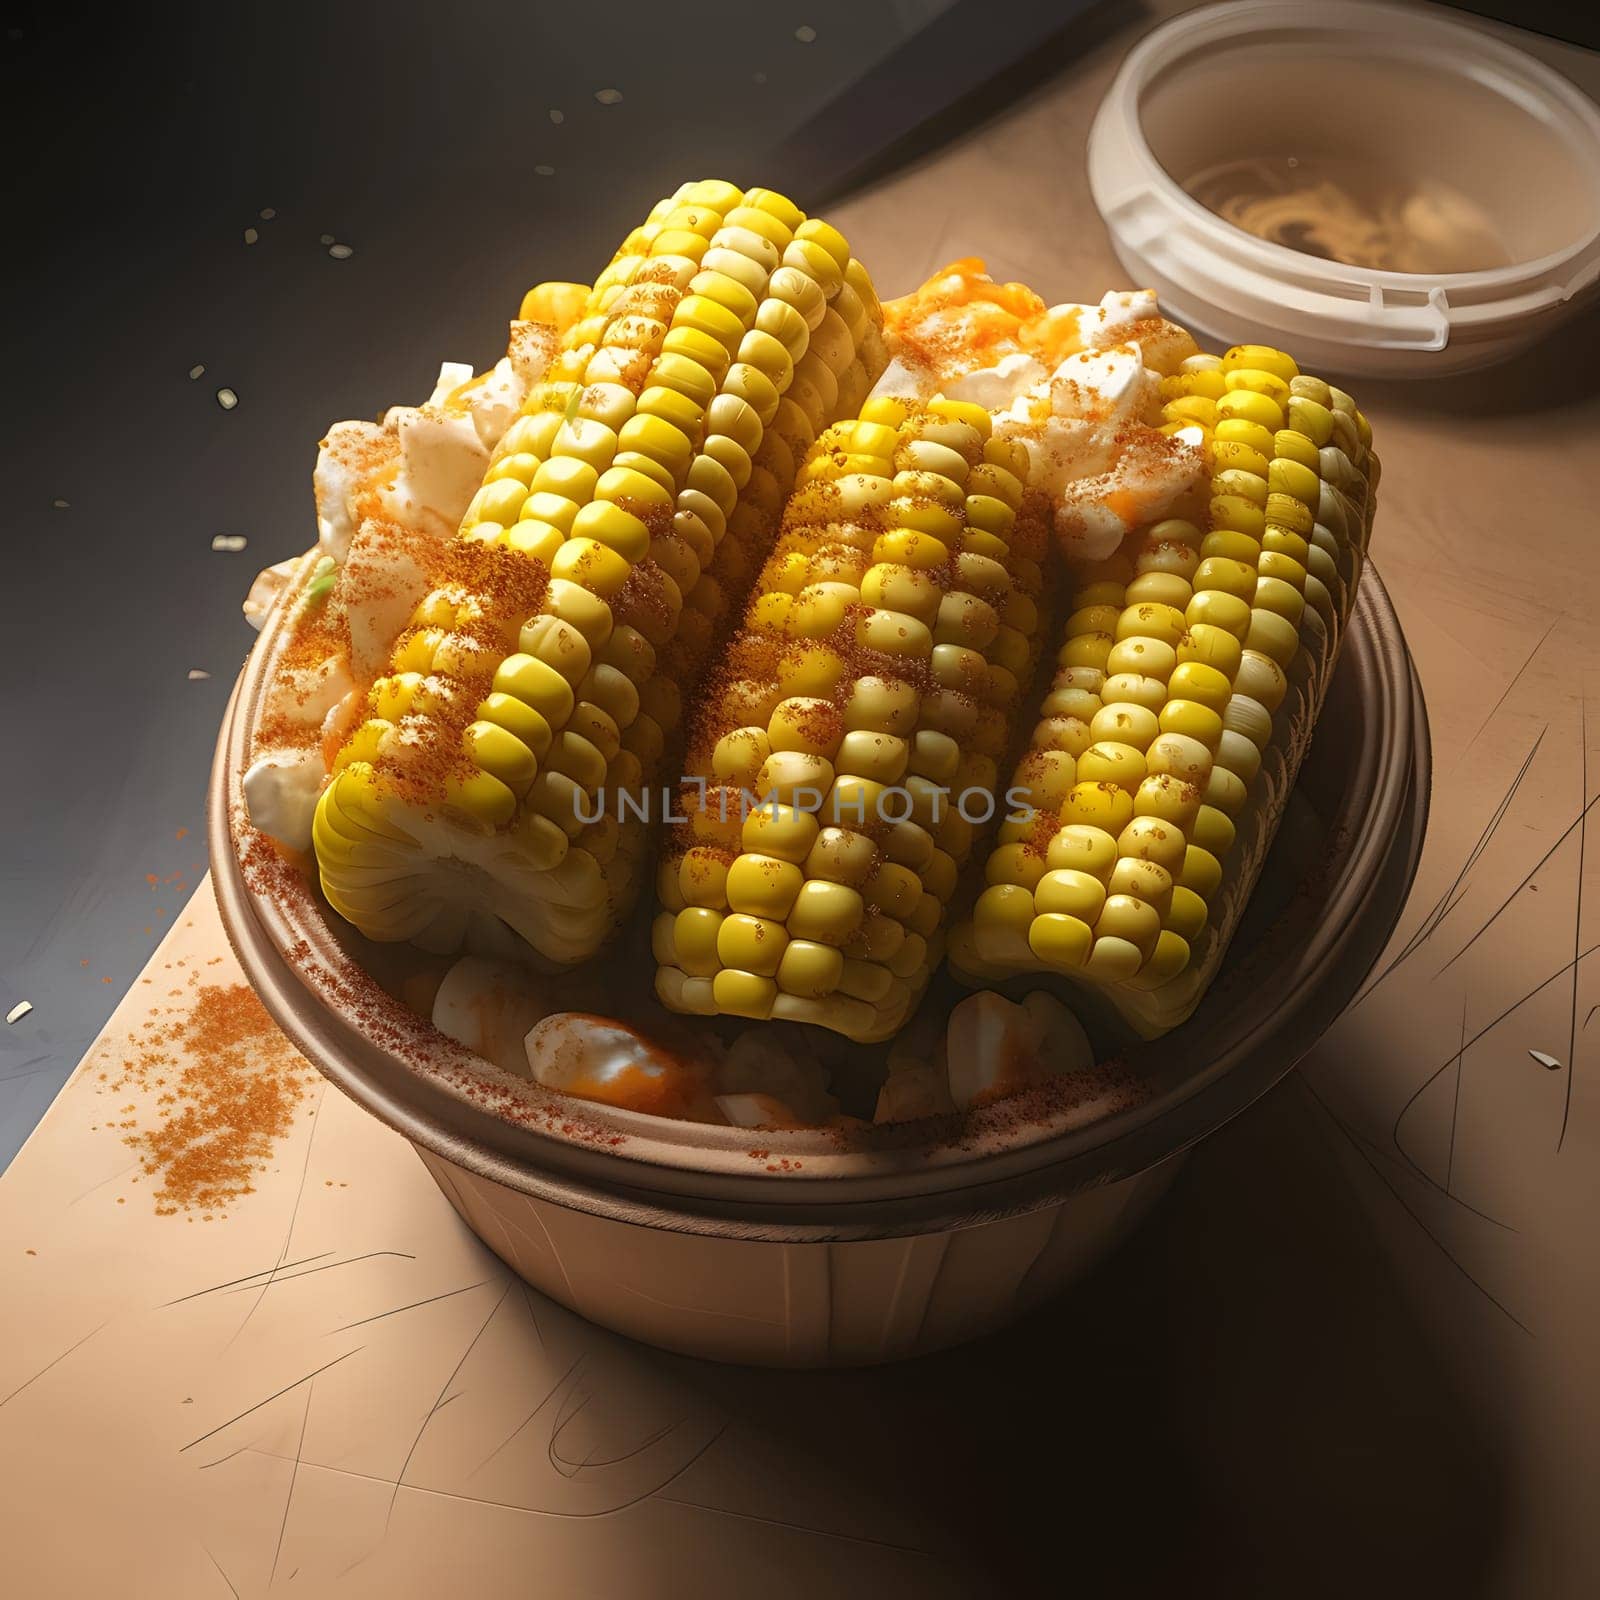 Small yellow corn cobs as elements of a vegetable salad in a container. Corn as a dish of thanksgiving for the harvest. An atmosphere of joy and celebration.